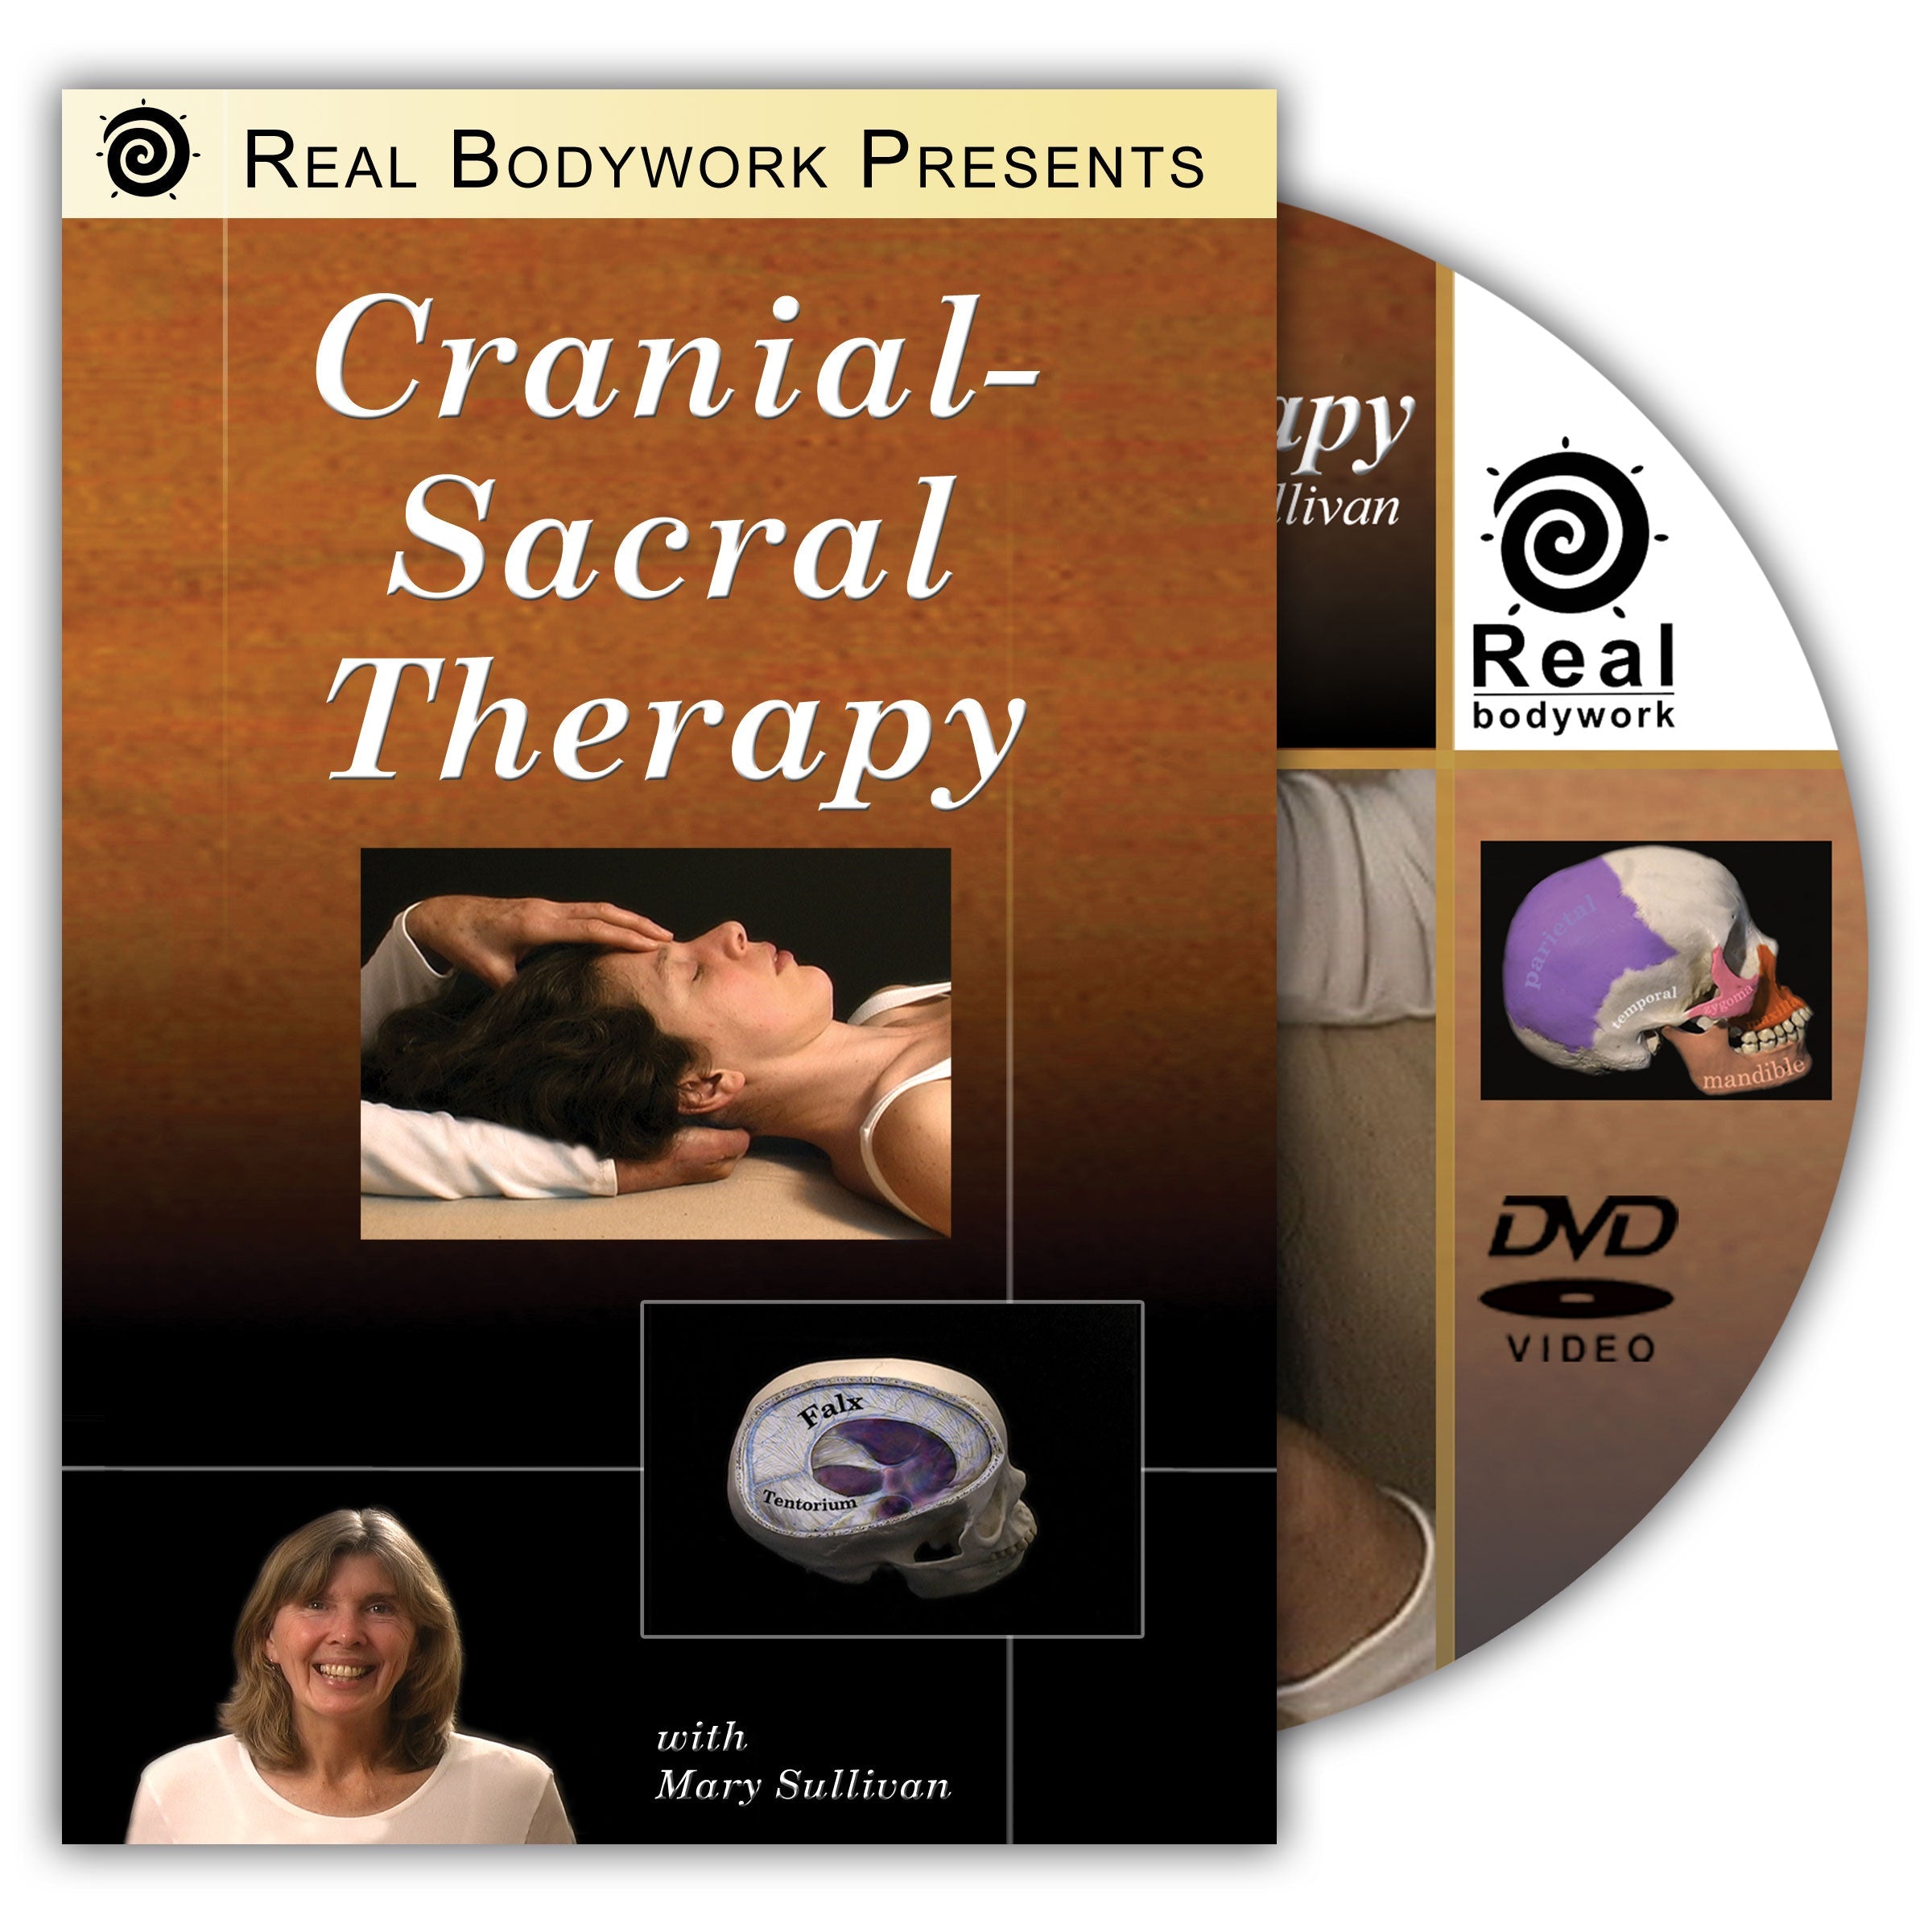 Cranial Sacral Massage Therapy Video on DVD - Real Bodywork